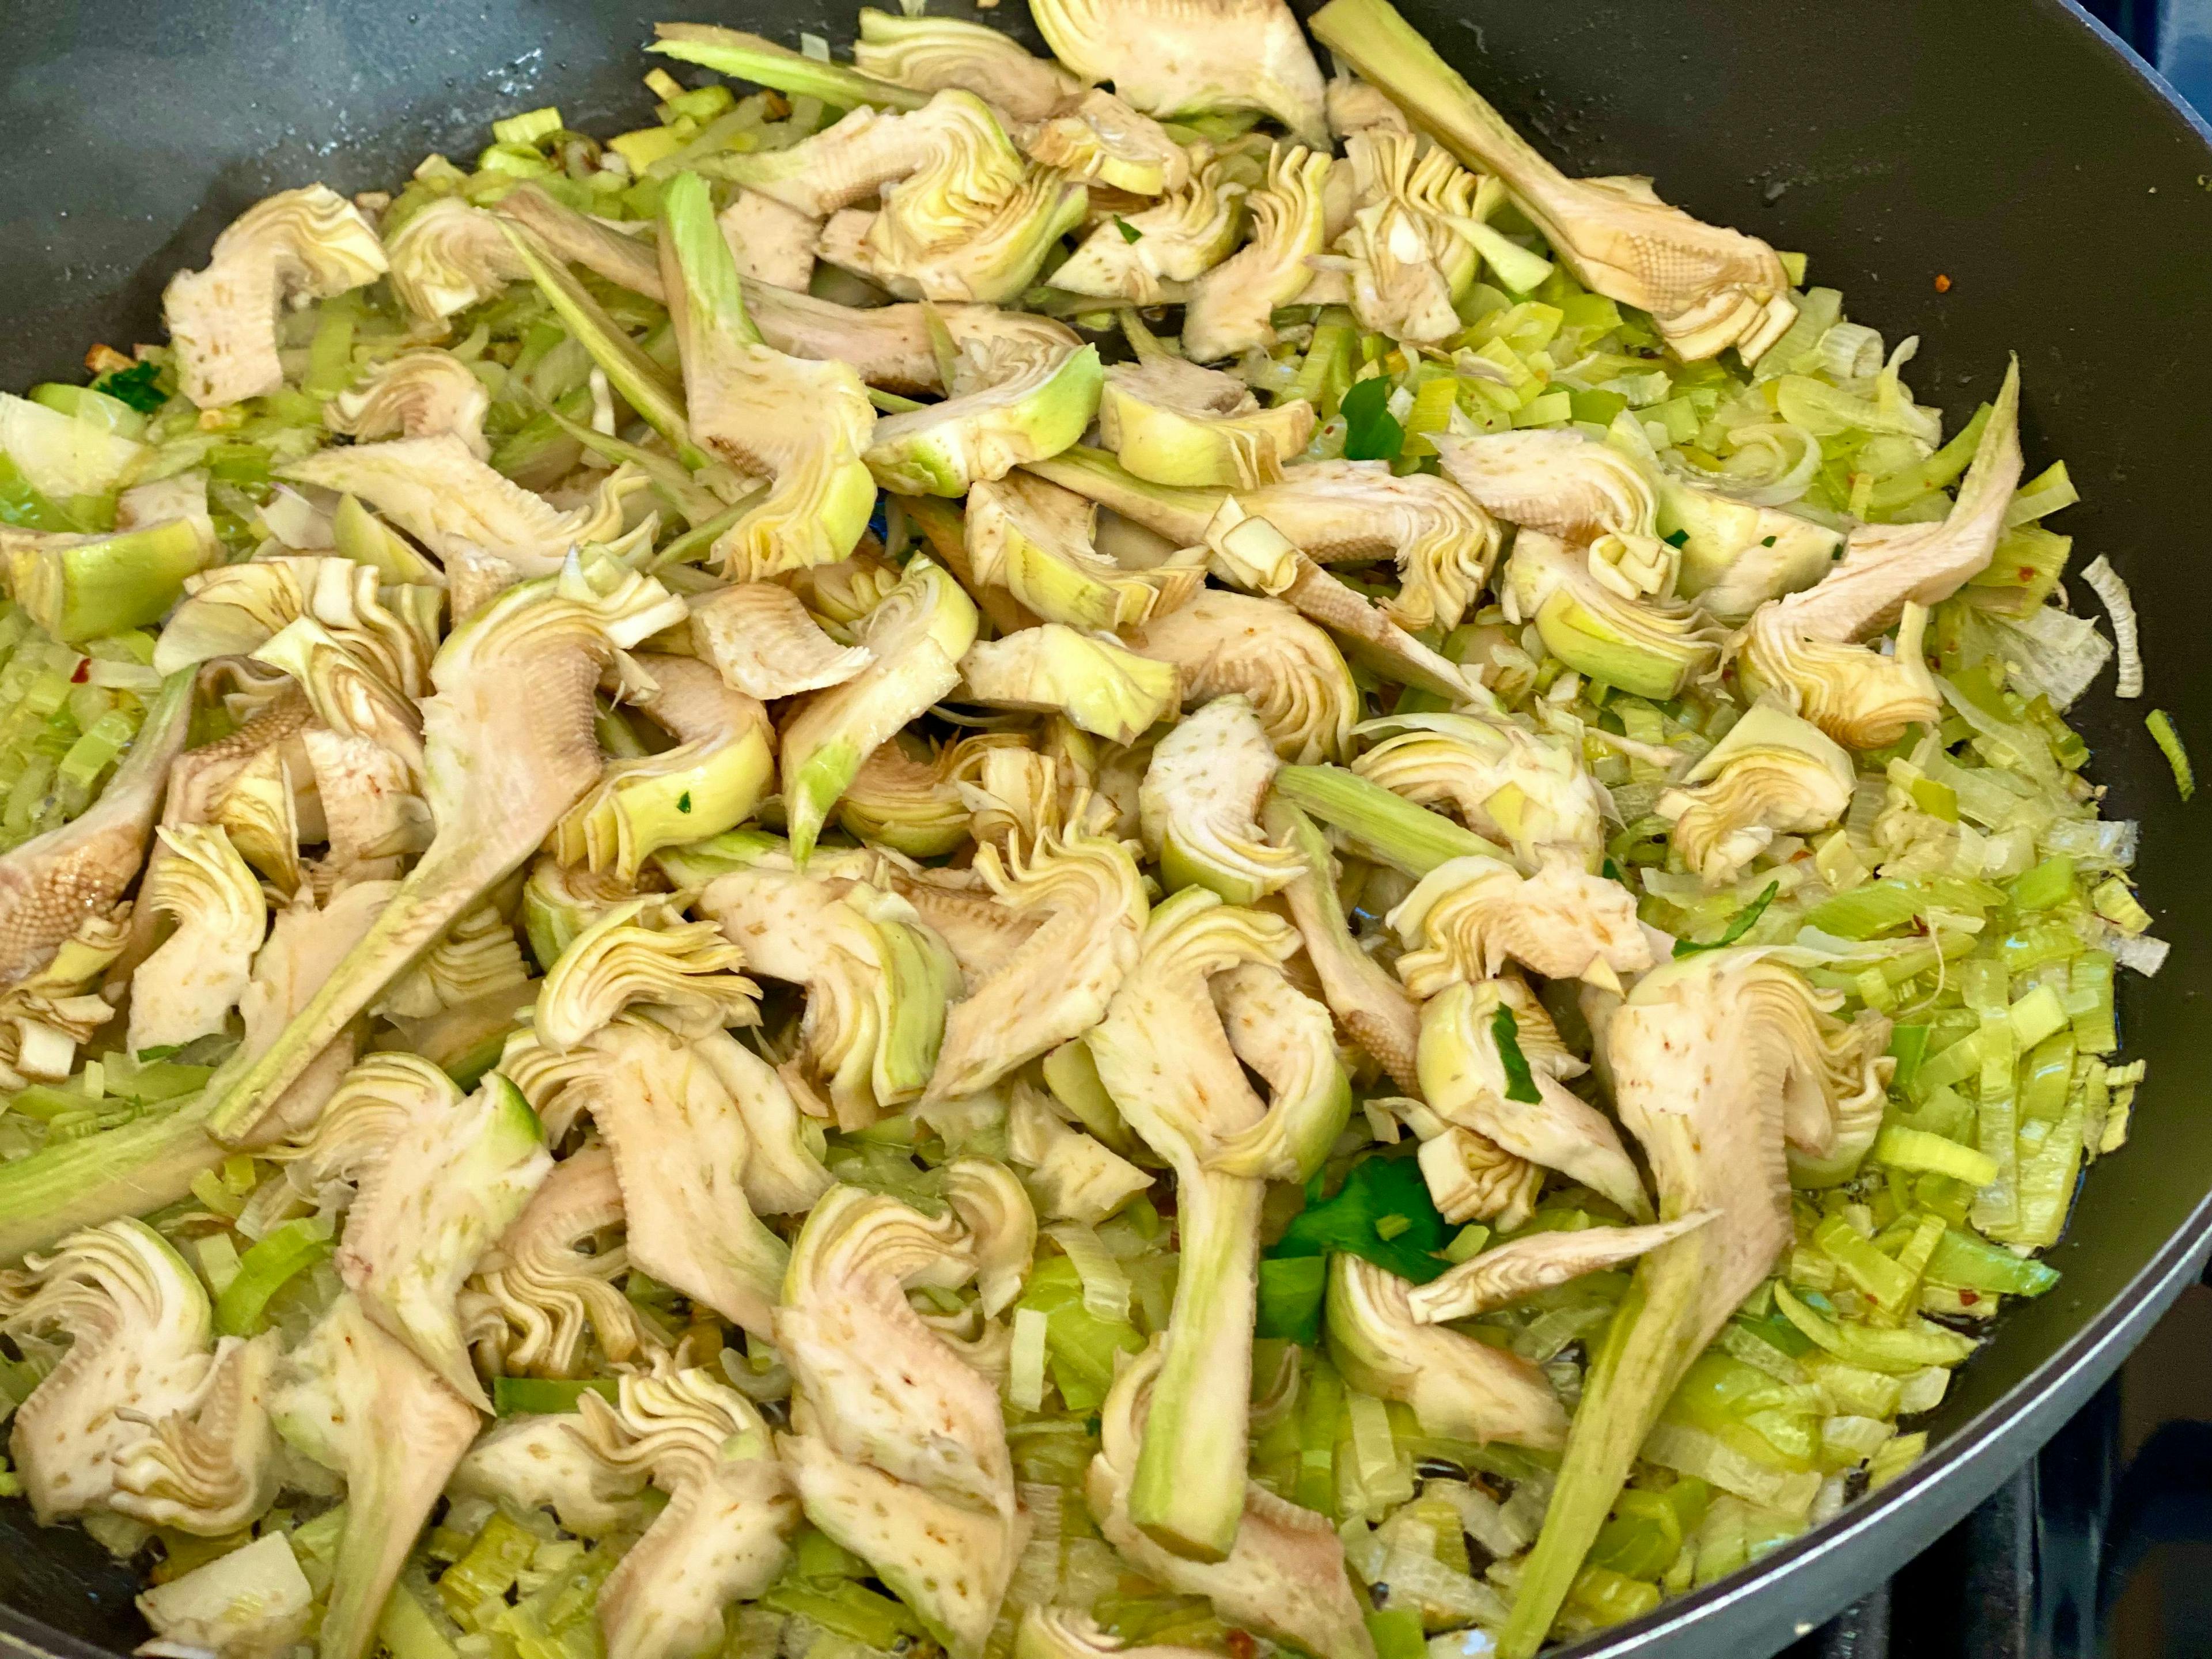 fry pan with leeks and artichoke slices cooking